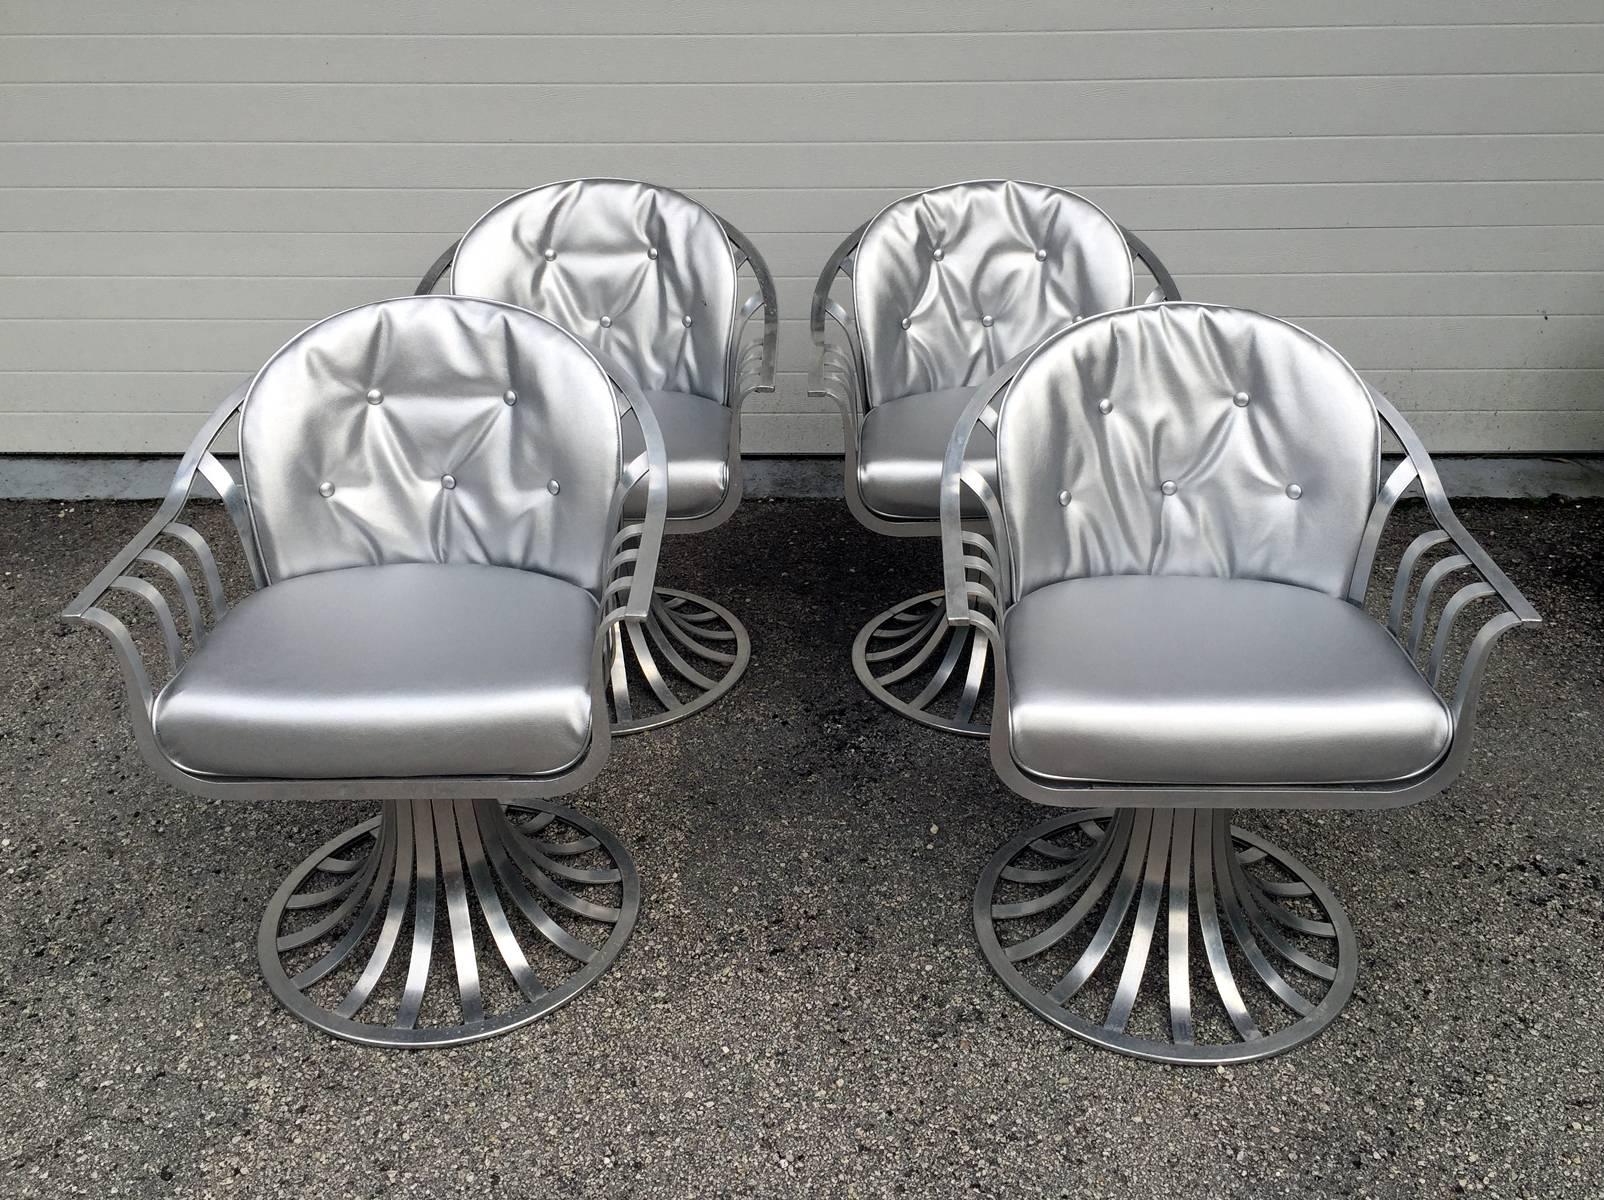 A great-looking set of four aluminum chairs by Russell Woodard. Sculptural form with curvy backrest continues into arms on swivel base. Stunning from all angels. New silver sterling upholstery add more glamour to the design. 
Very versatile chairs